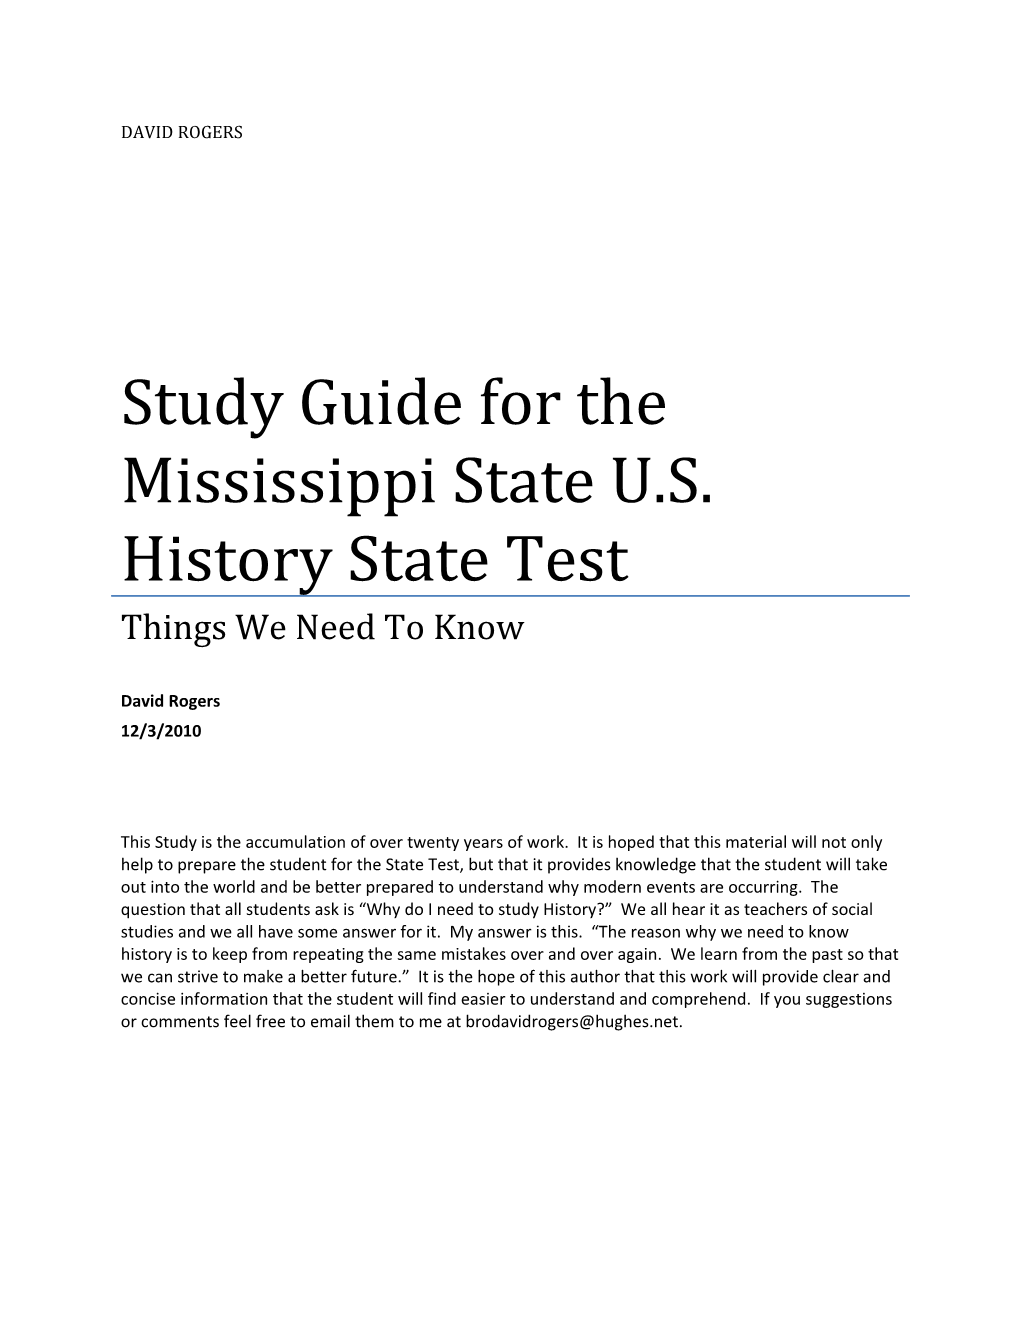 Study Guide for the Mississippi State U.S. History State Test